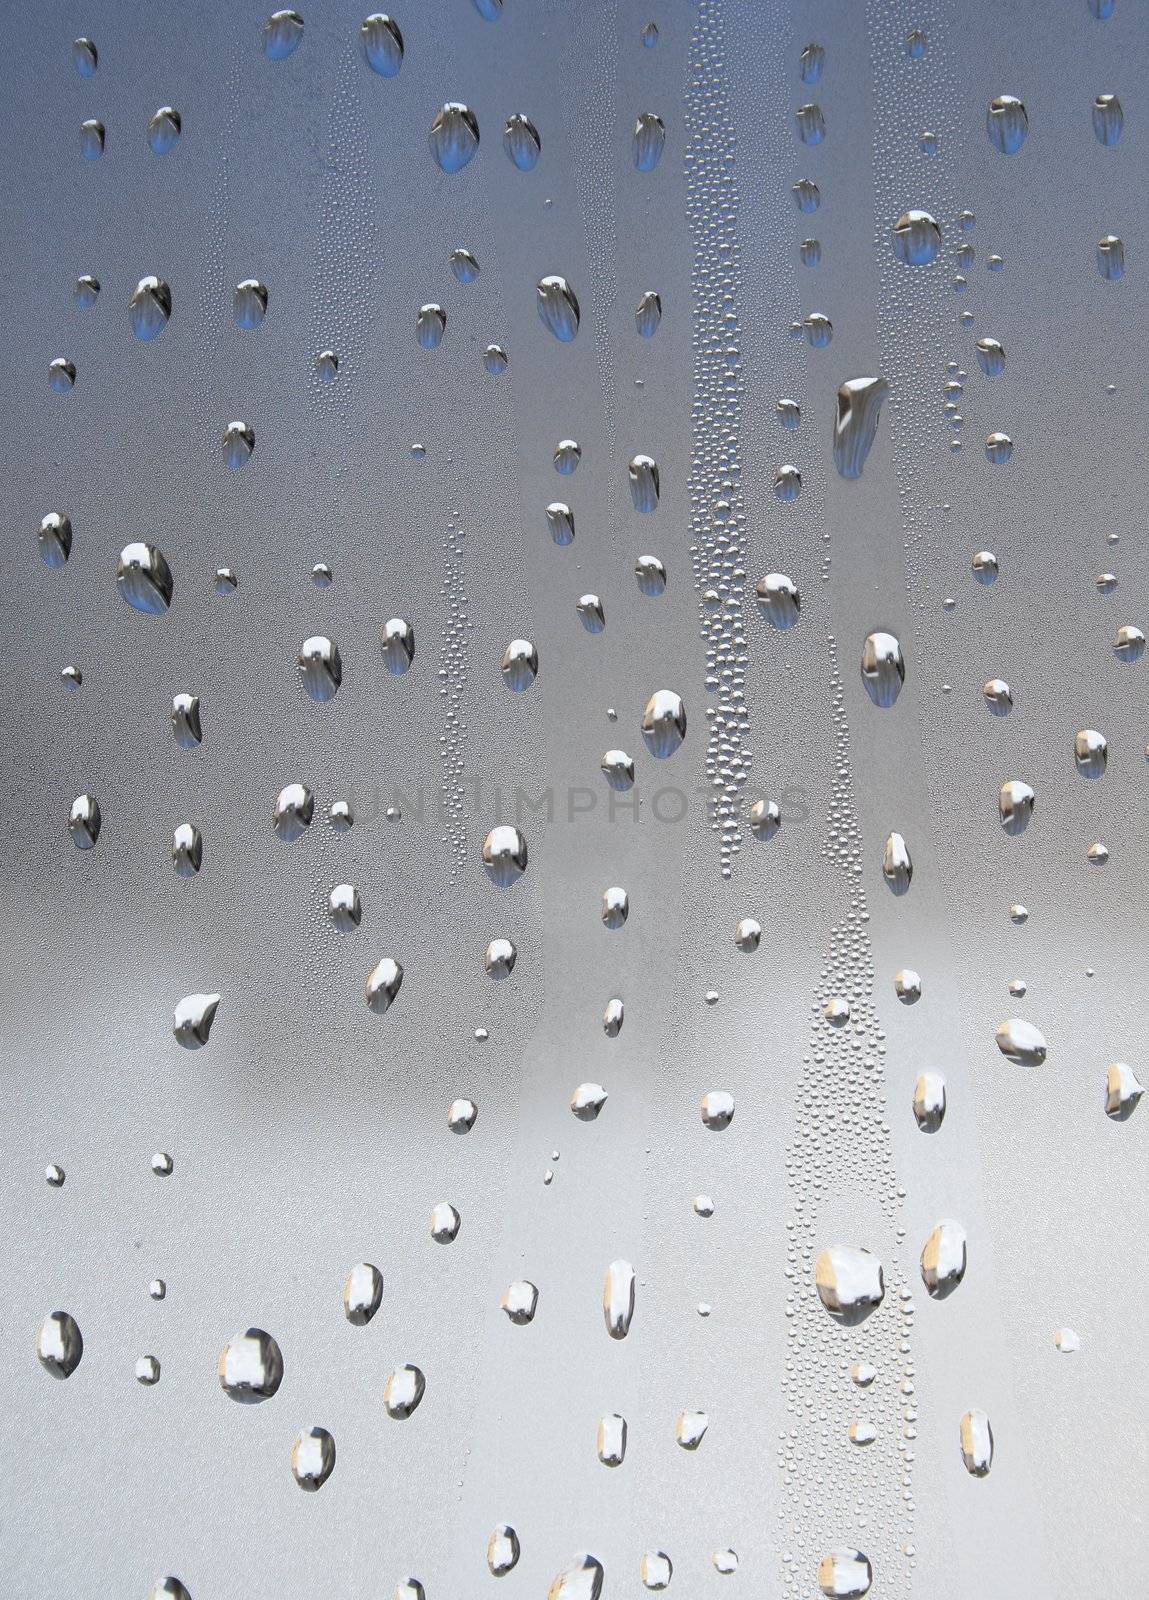 Water drops of metallic color on glass.